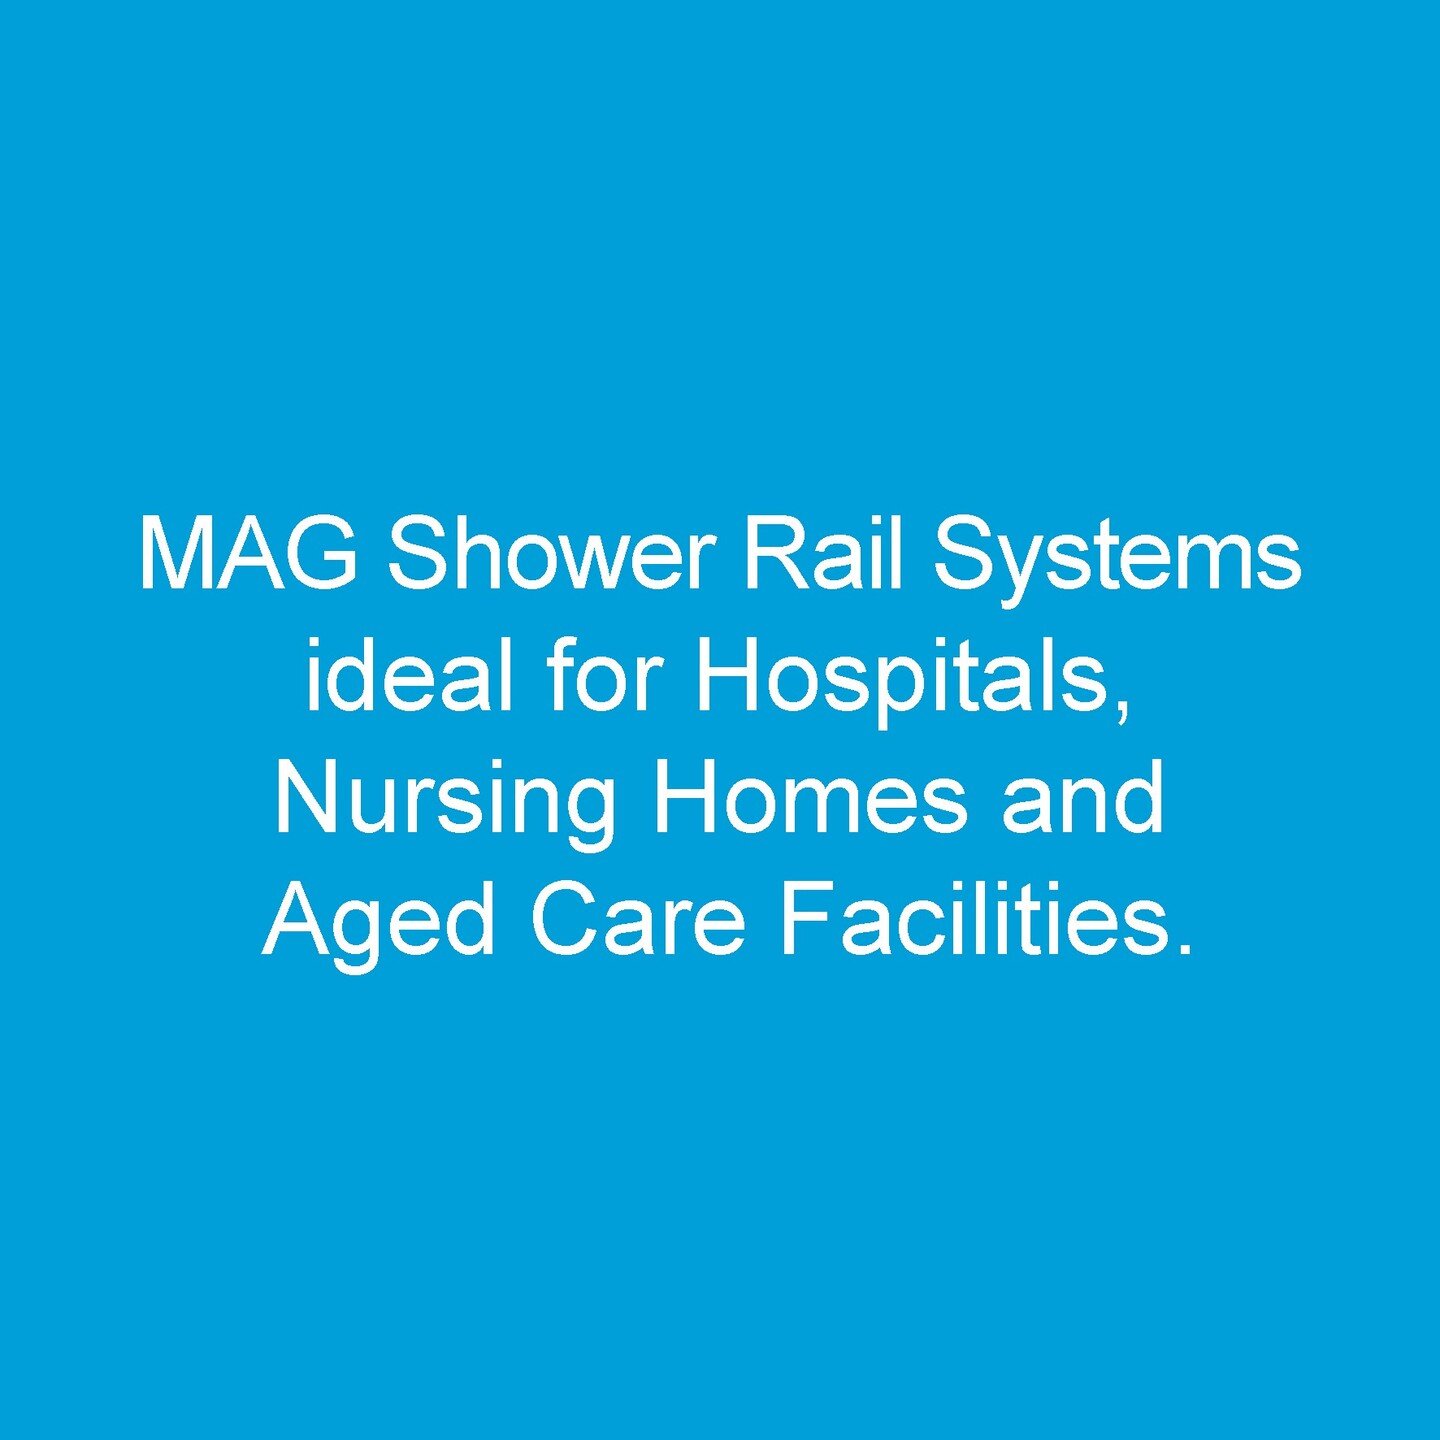 Hospital / Health Care Shower Systems
Ideal for Hospitals, Nursing Homes and aged care facilities.

For more information call us on
(03) 9399 8444 or send
us an email on sales@magspp.com.au

#health #care #basin #plumbing #plumbinglife #agedcare #hos